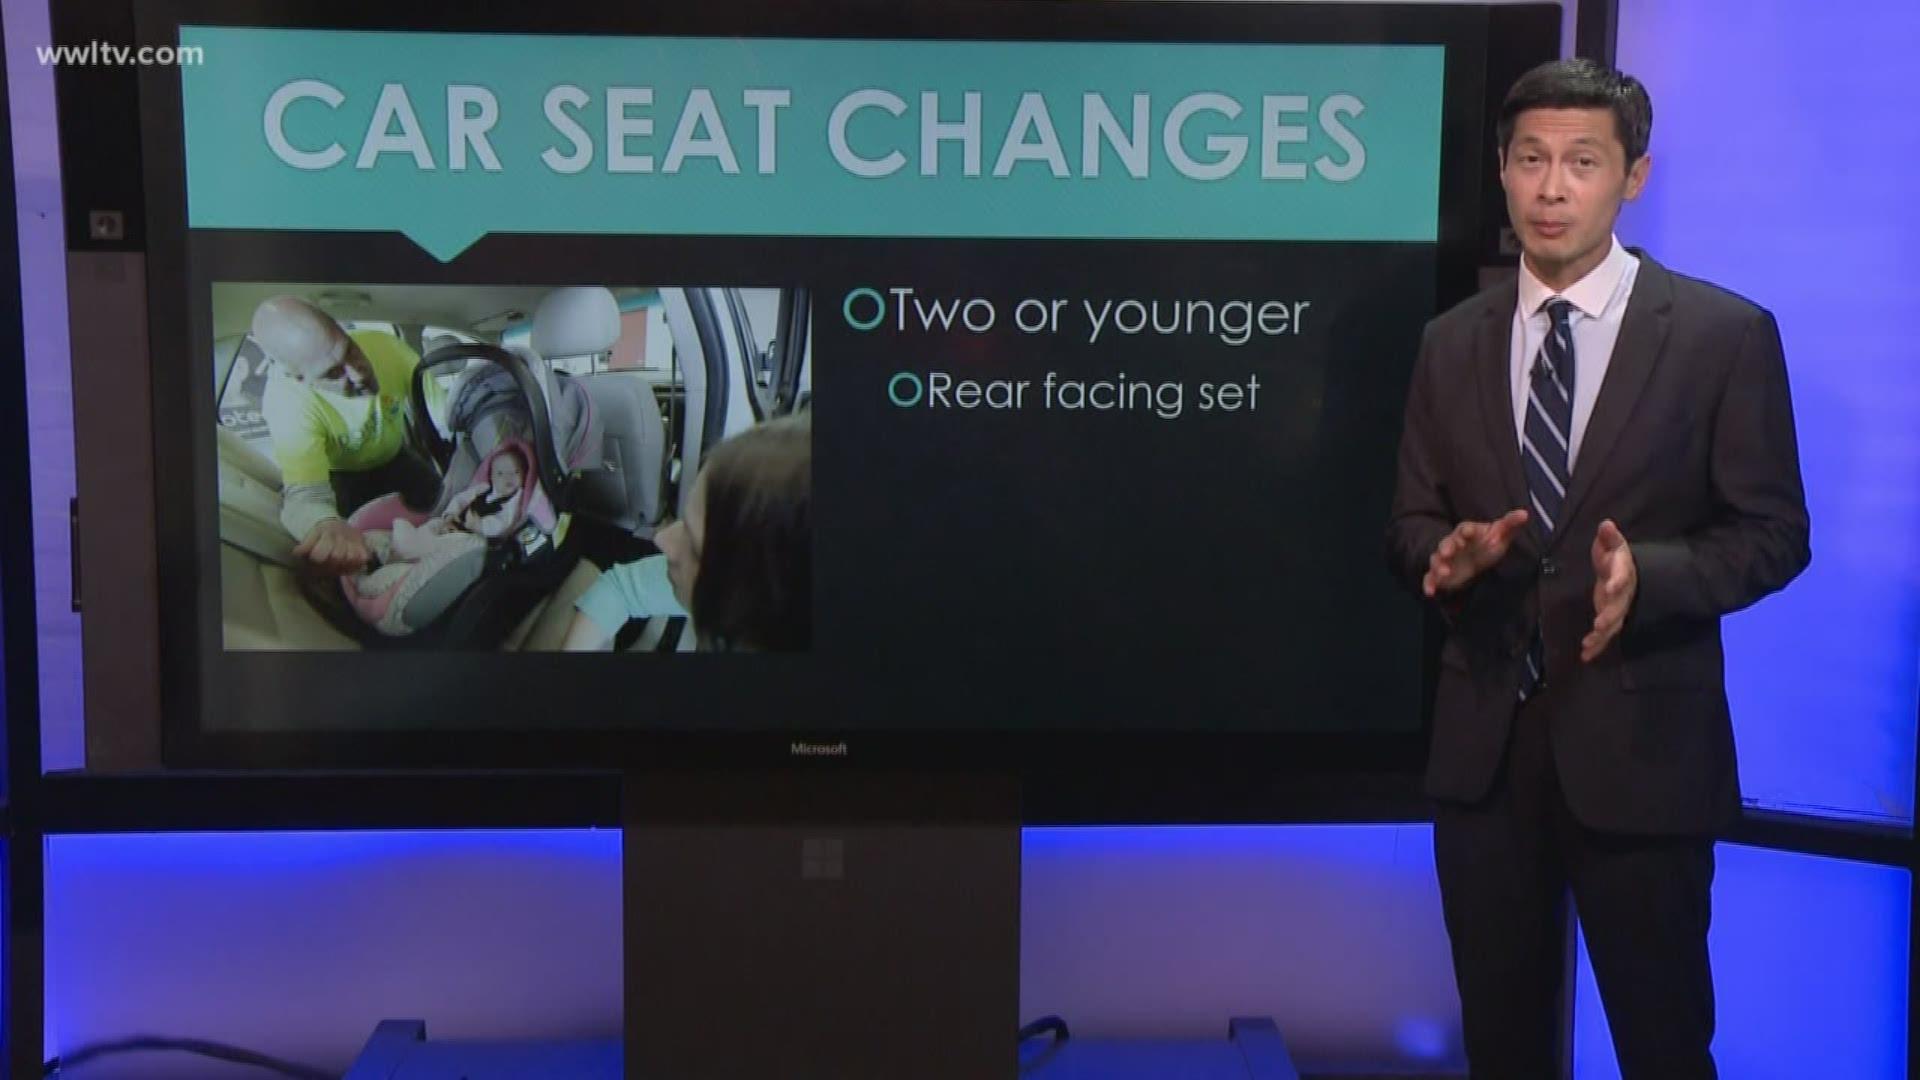 The Louisiana state legislature recently passed changes to the car seat law for children.